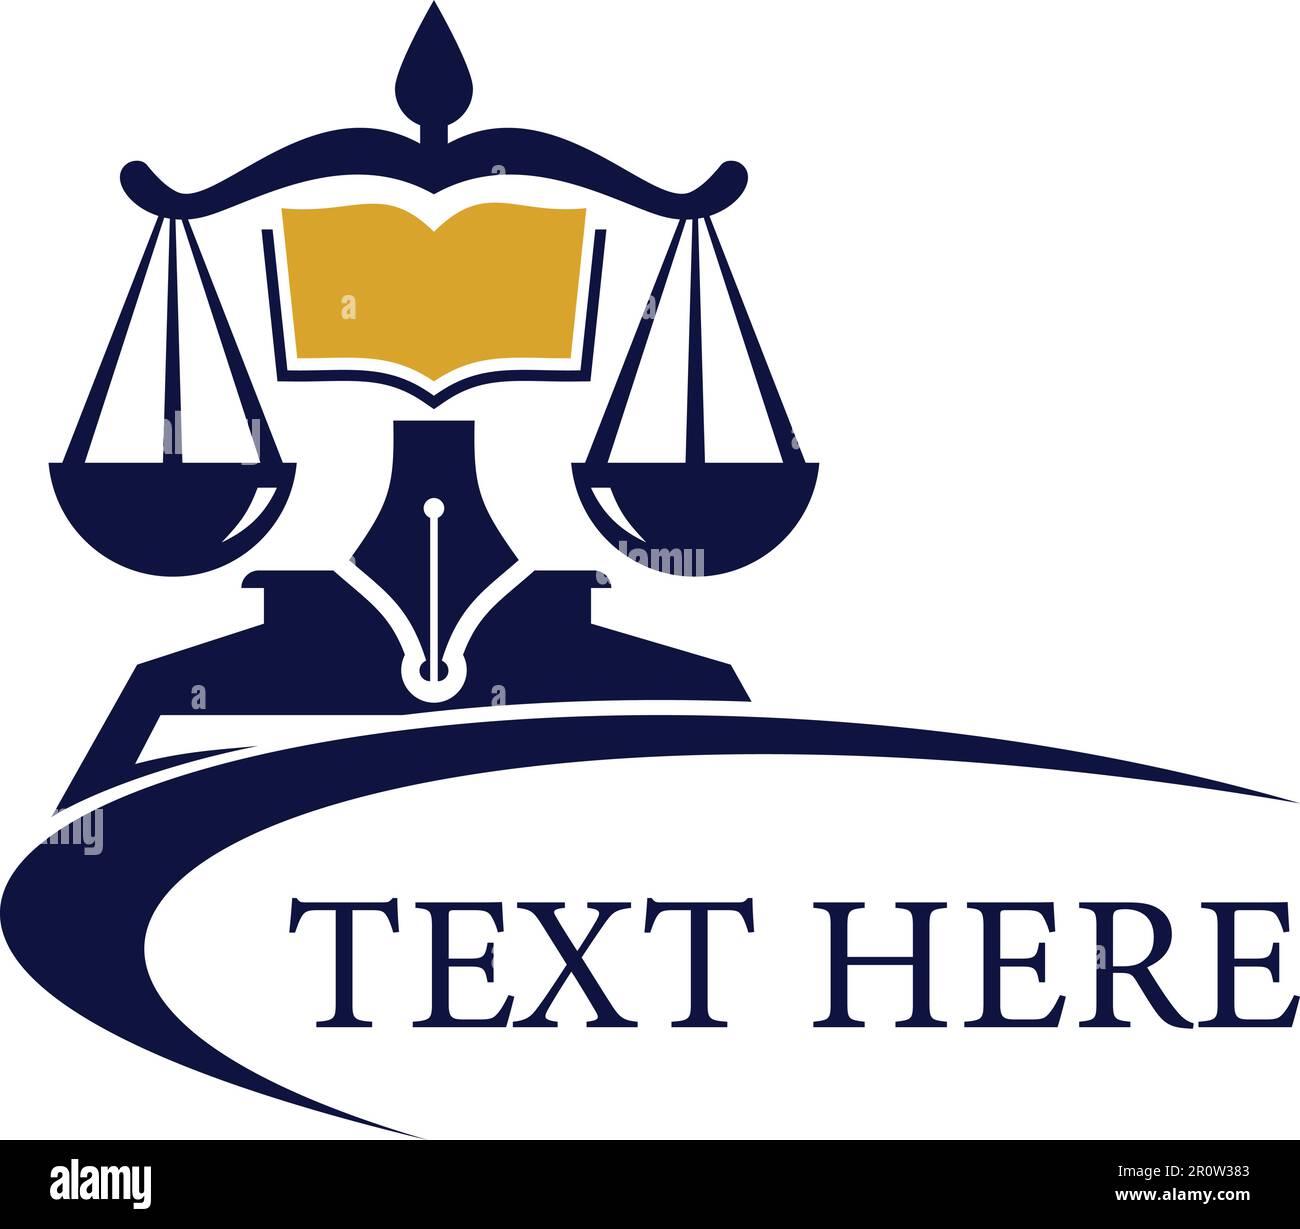 justice lawyer logo and creative concept Stock Vector